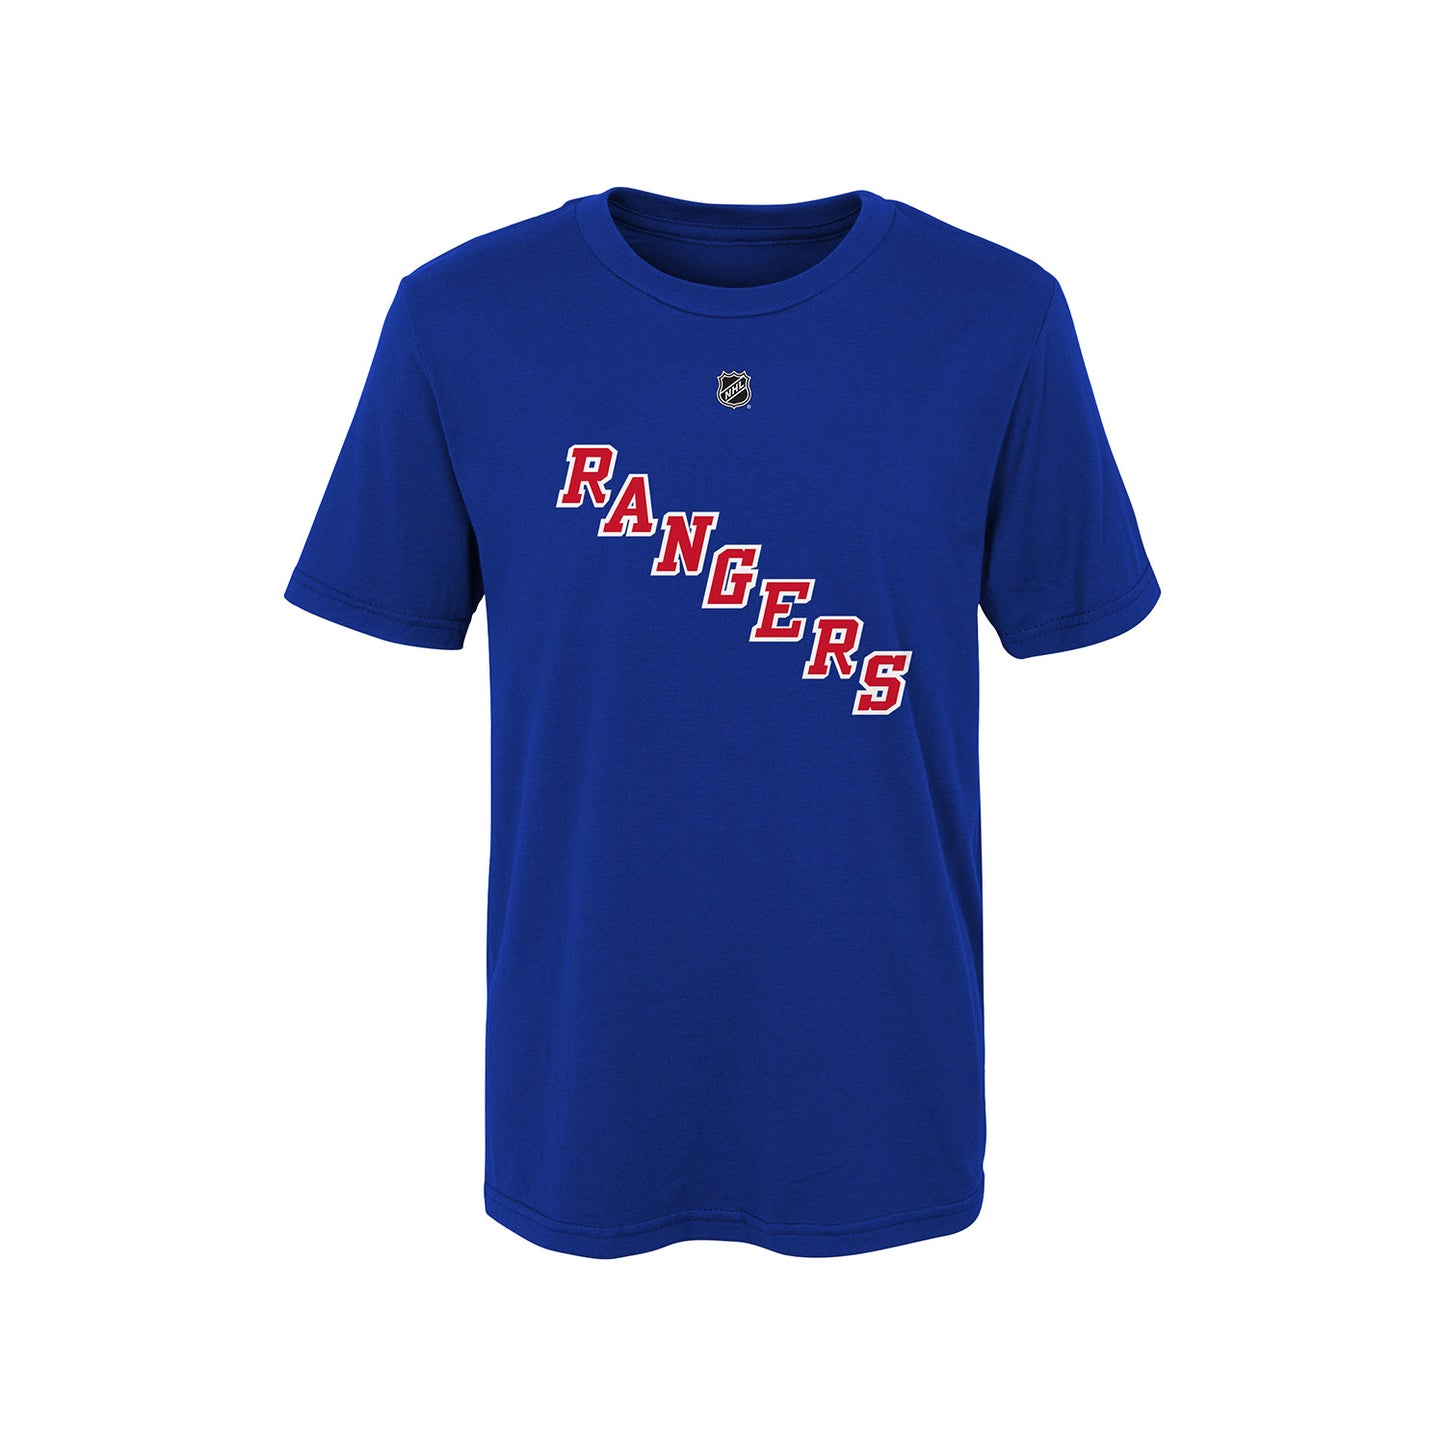 Kids Rangers Igor Shesterkin Name & Number Tee In Blue, Red & White - Front View